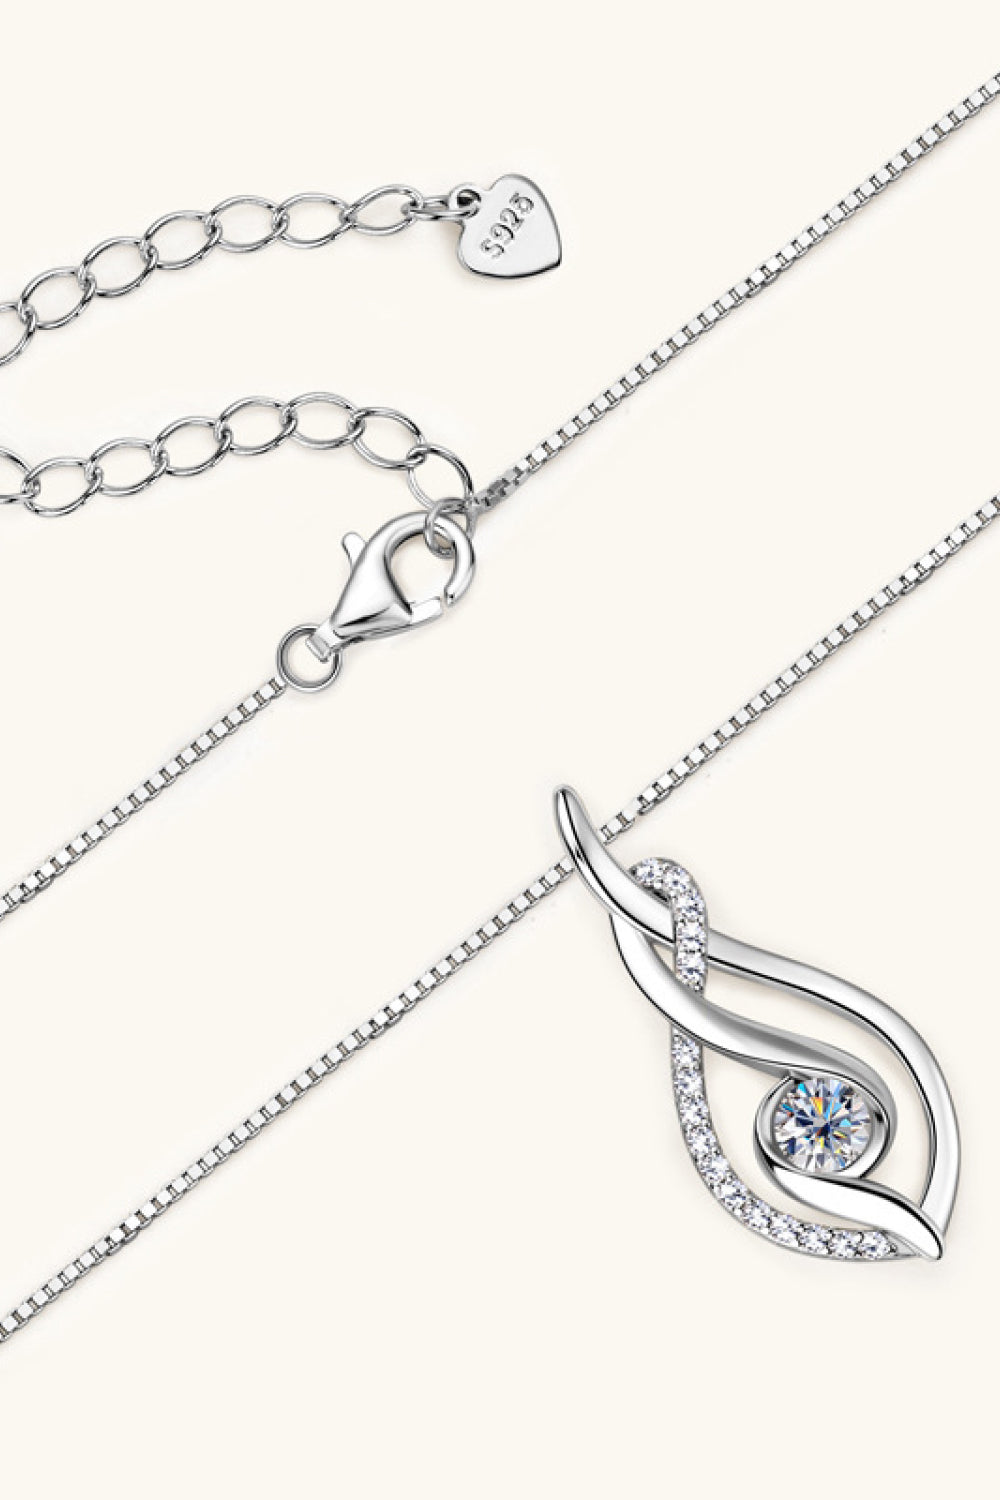 Kingdom Shopping Centre - Simple. Elegant. Classic ✨ Shop sophisticated  silver chains at H.Samuel. | Facebook